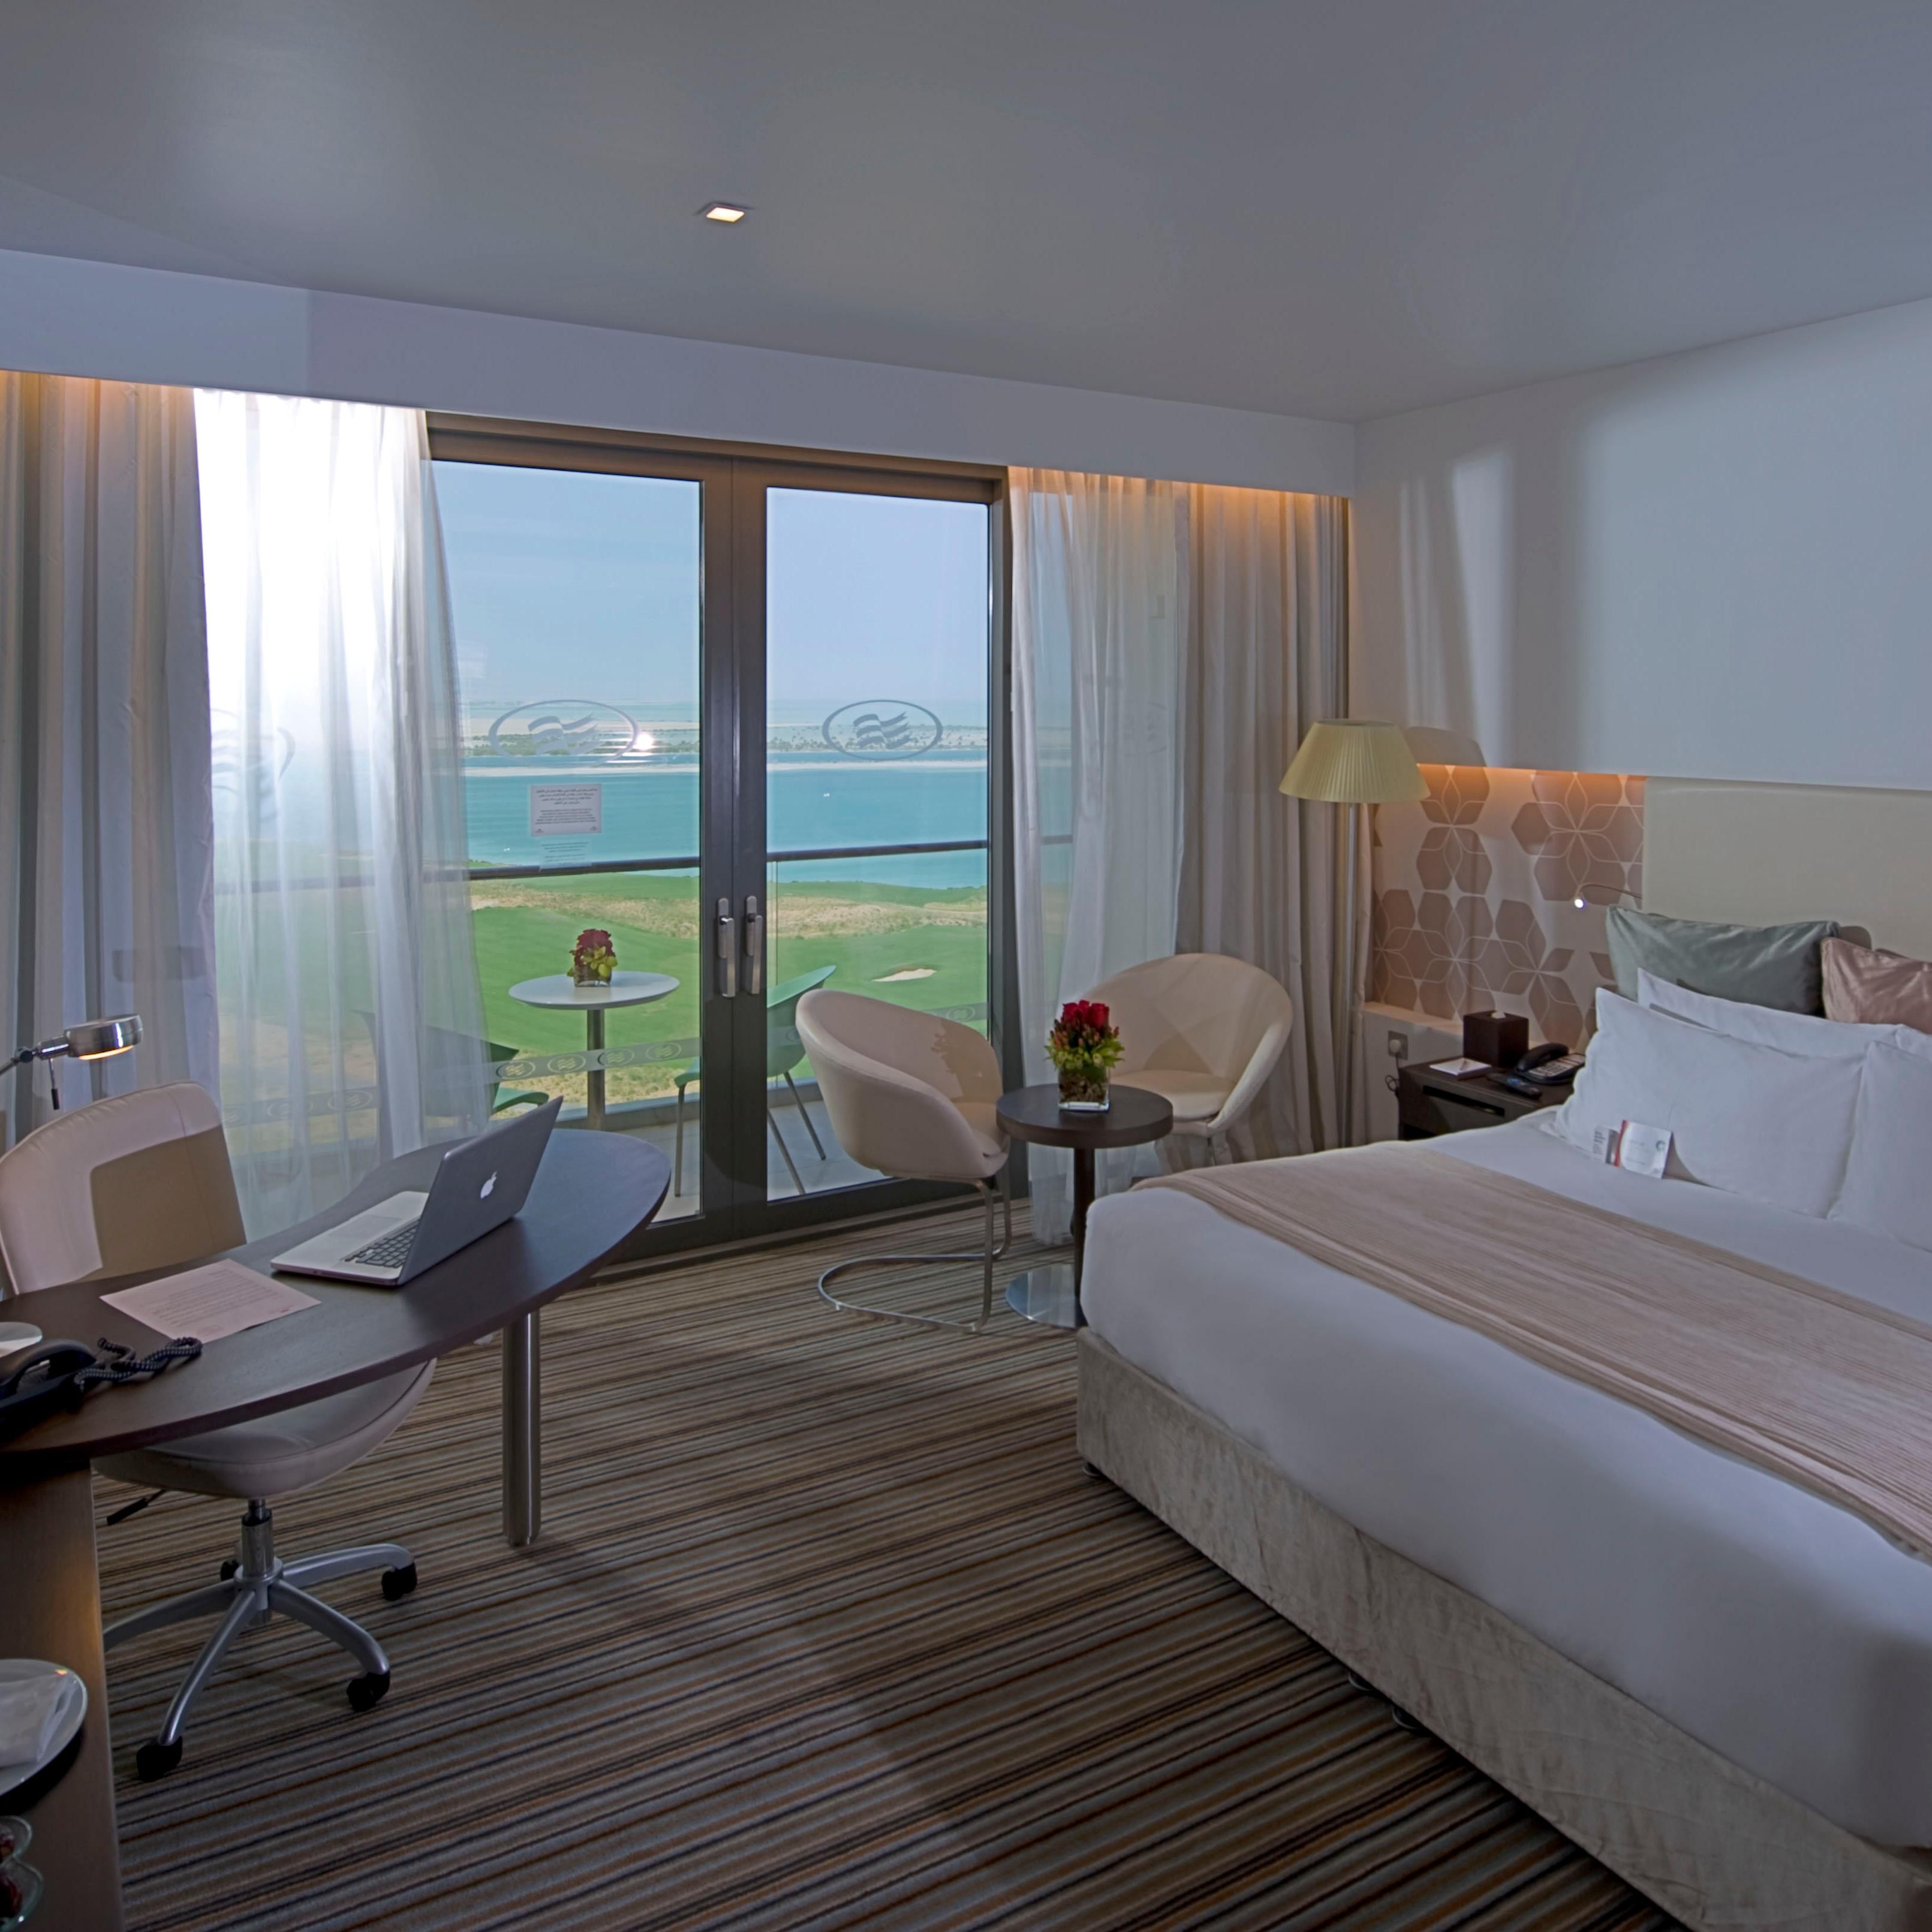 Stay in a Deluxe Room with an amazing view of the sea